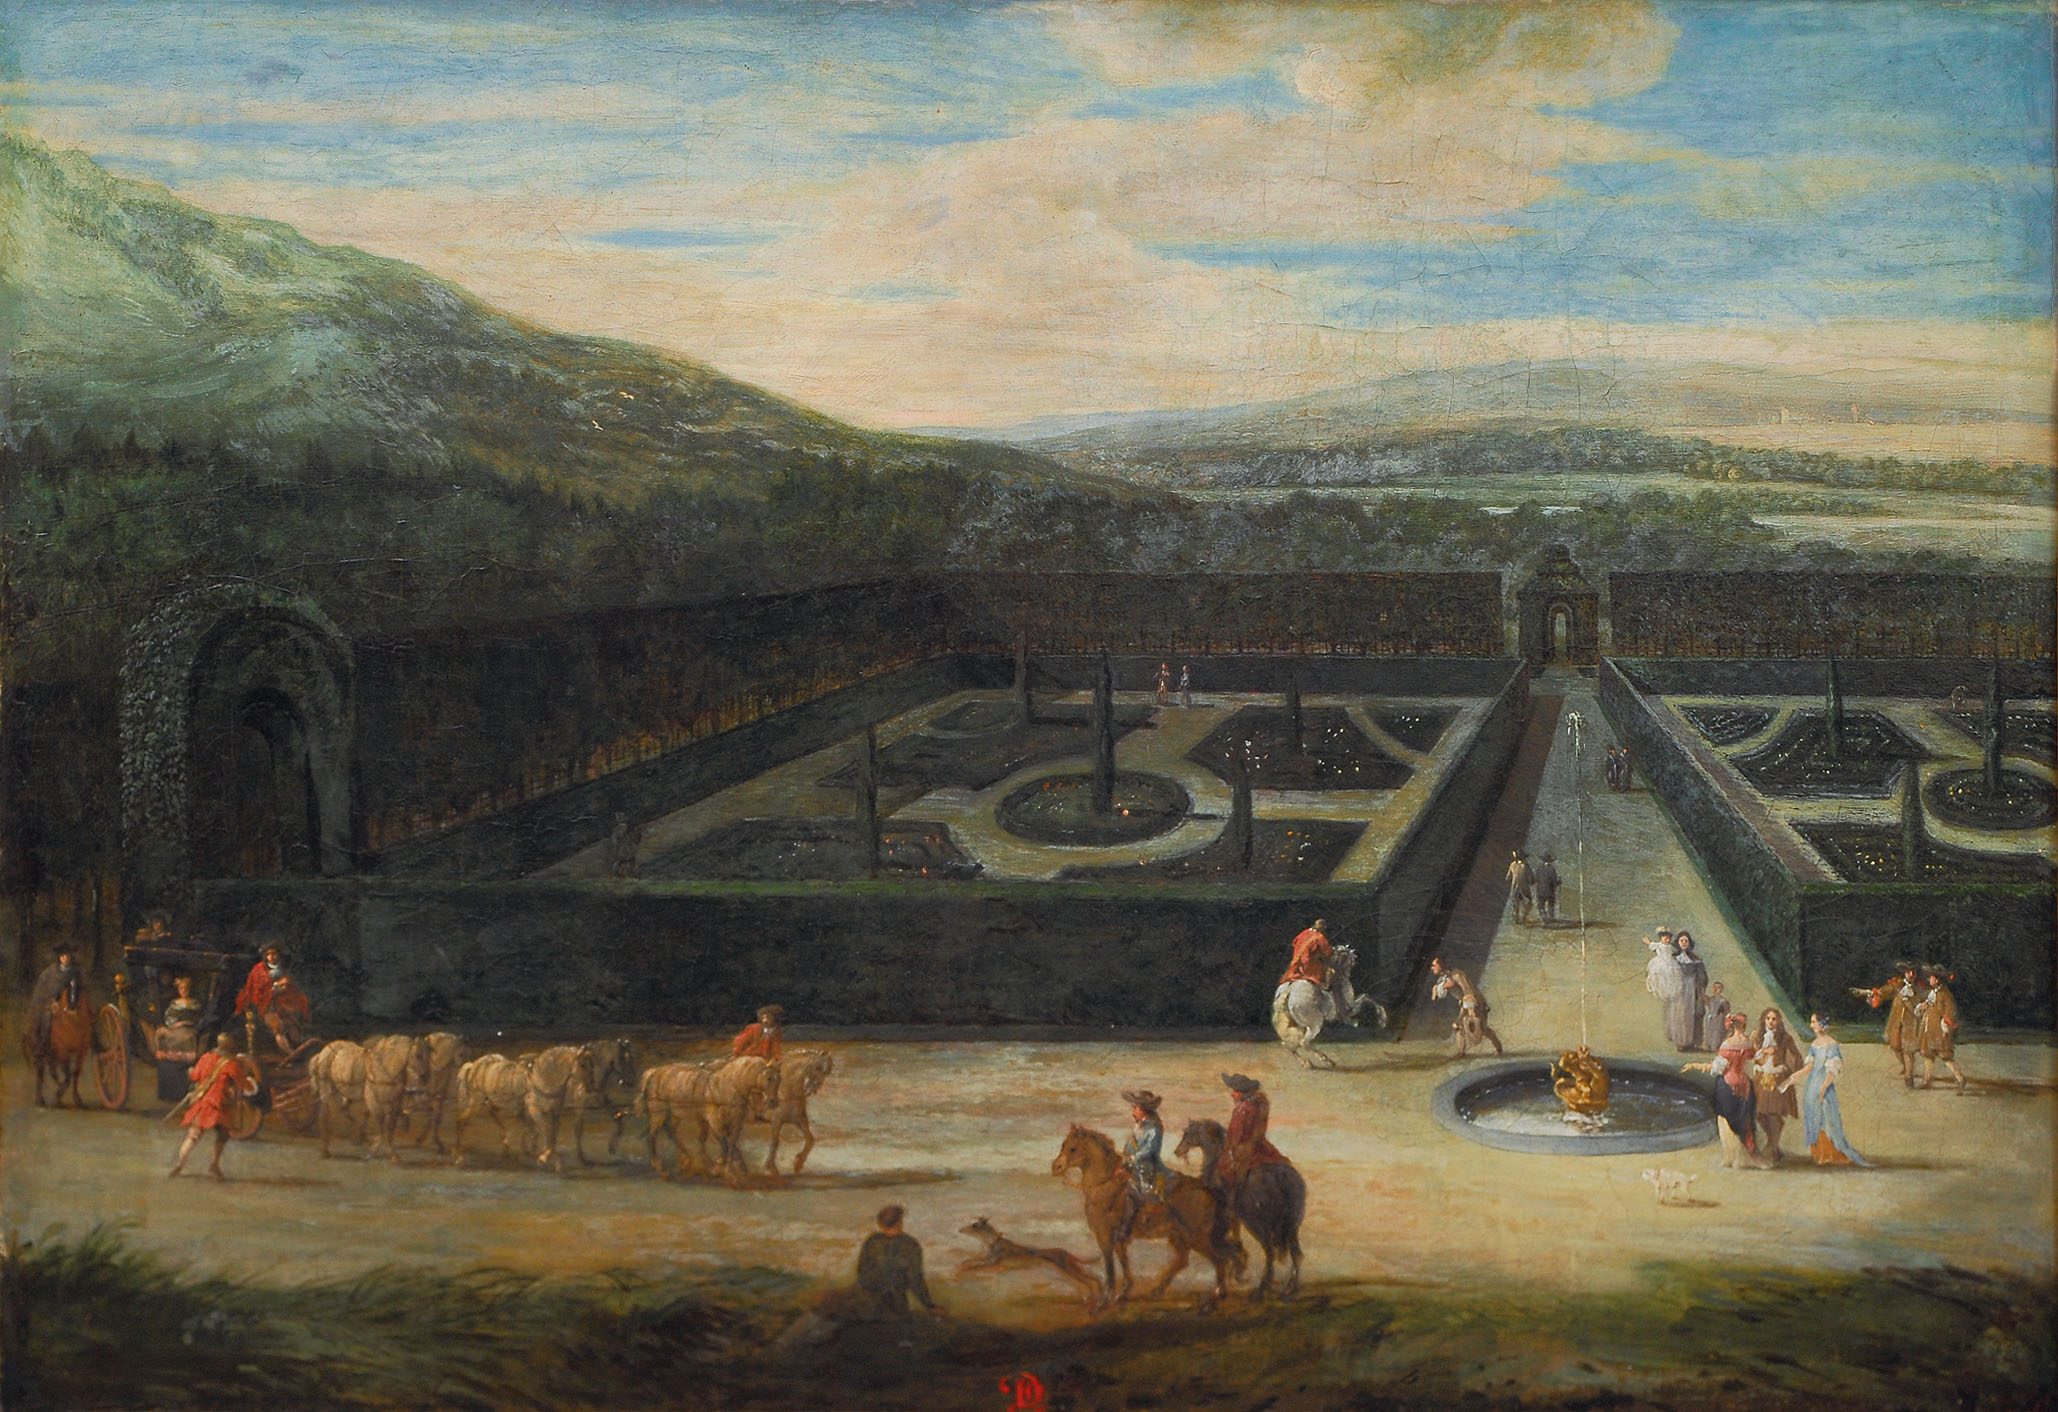 Baroque palace garden with carriage drawn by six horses